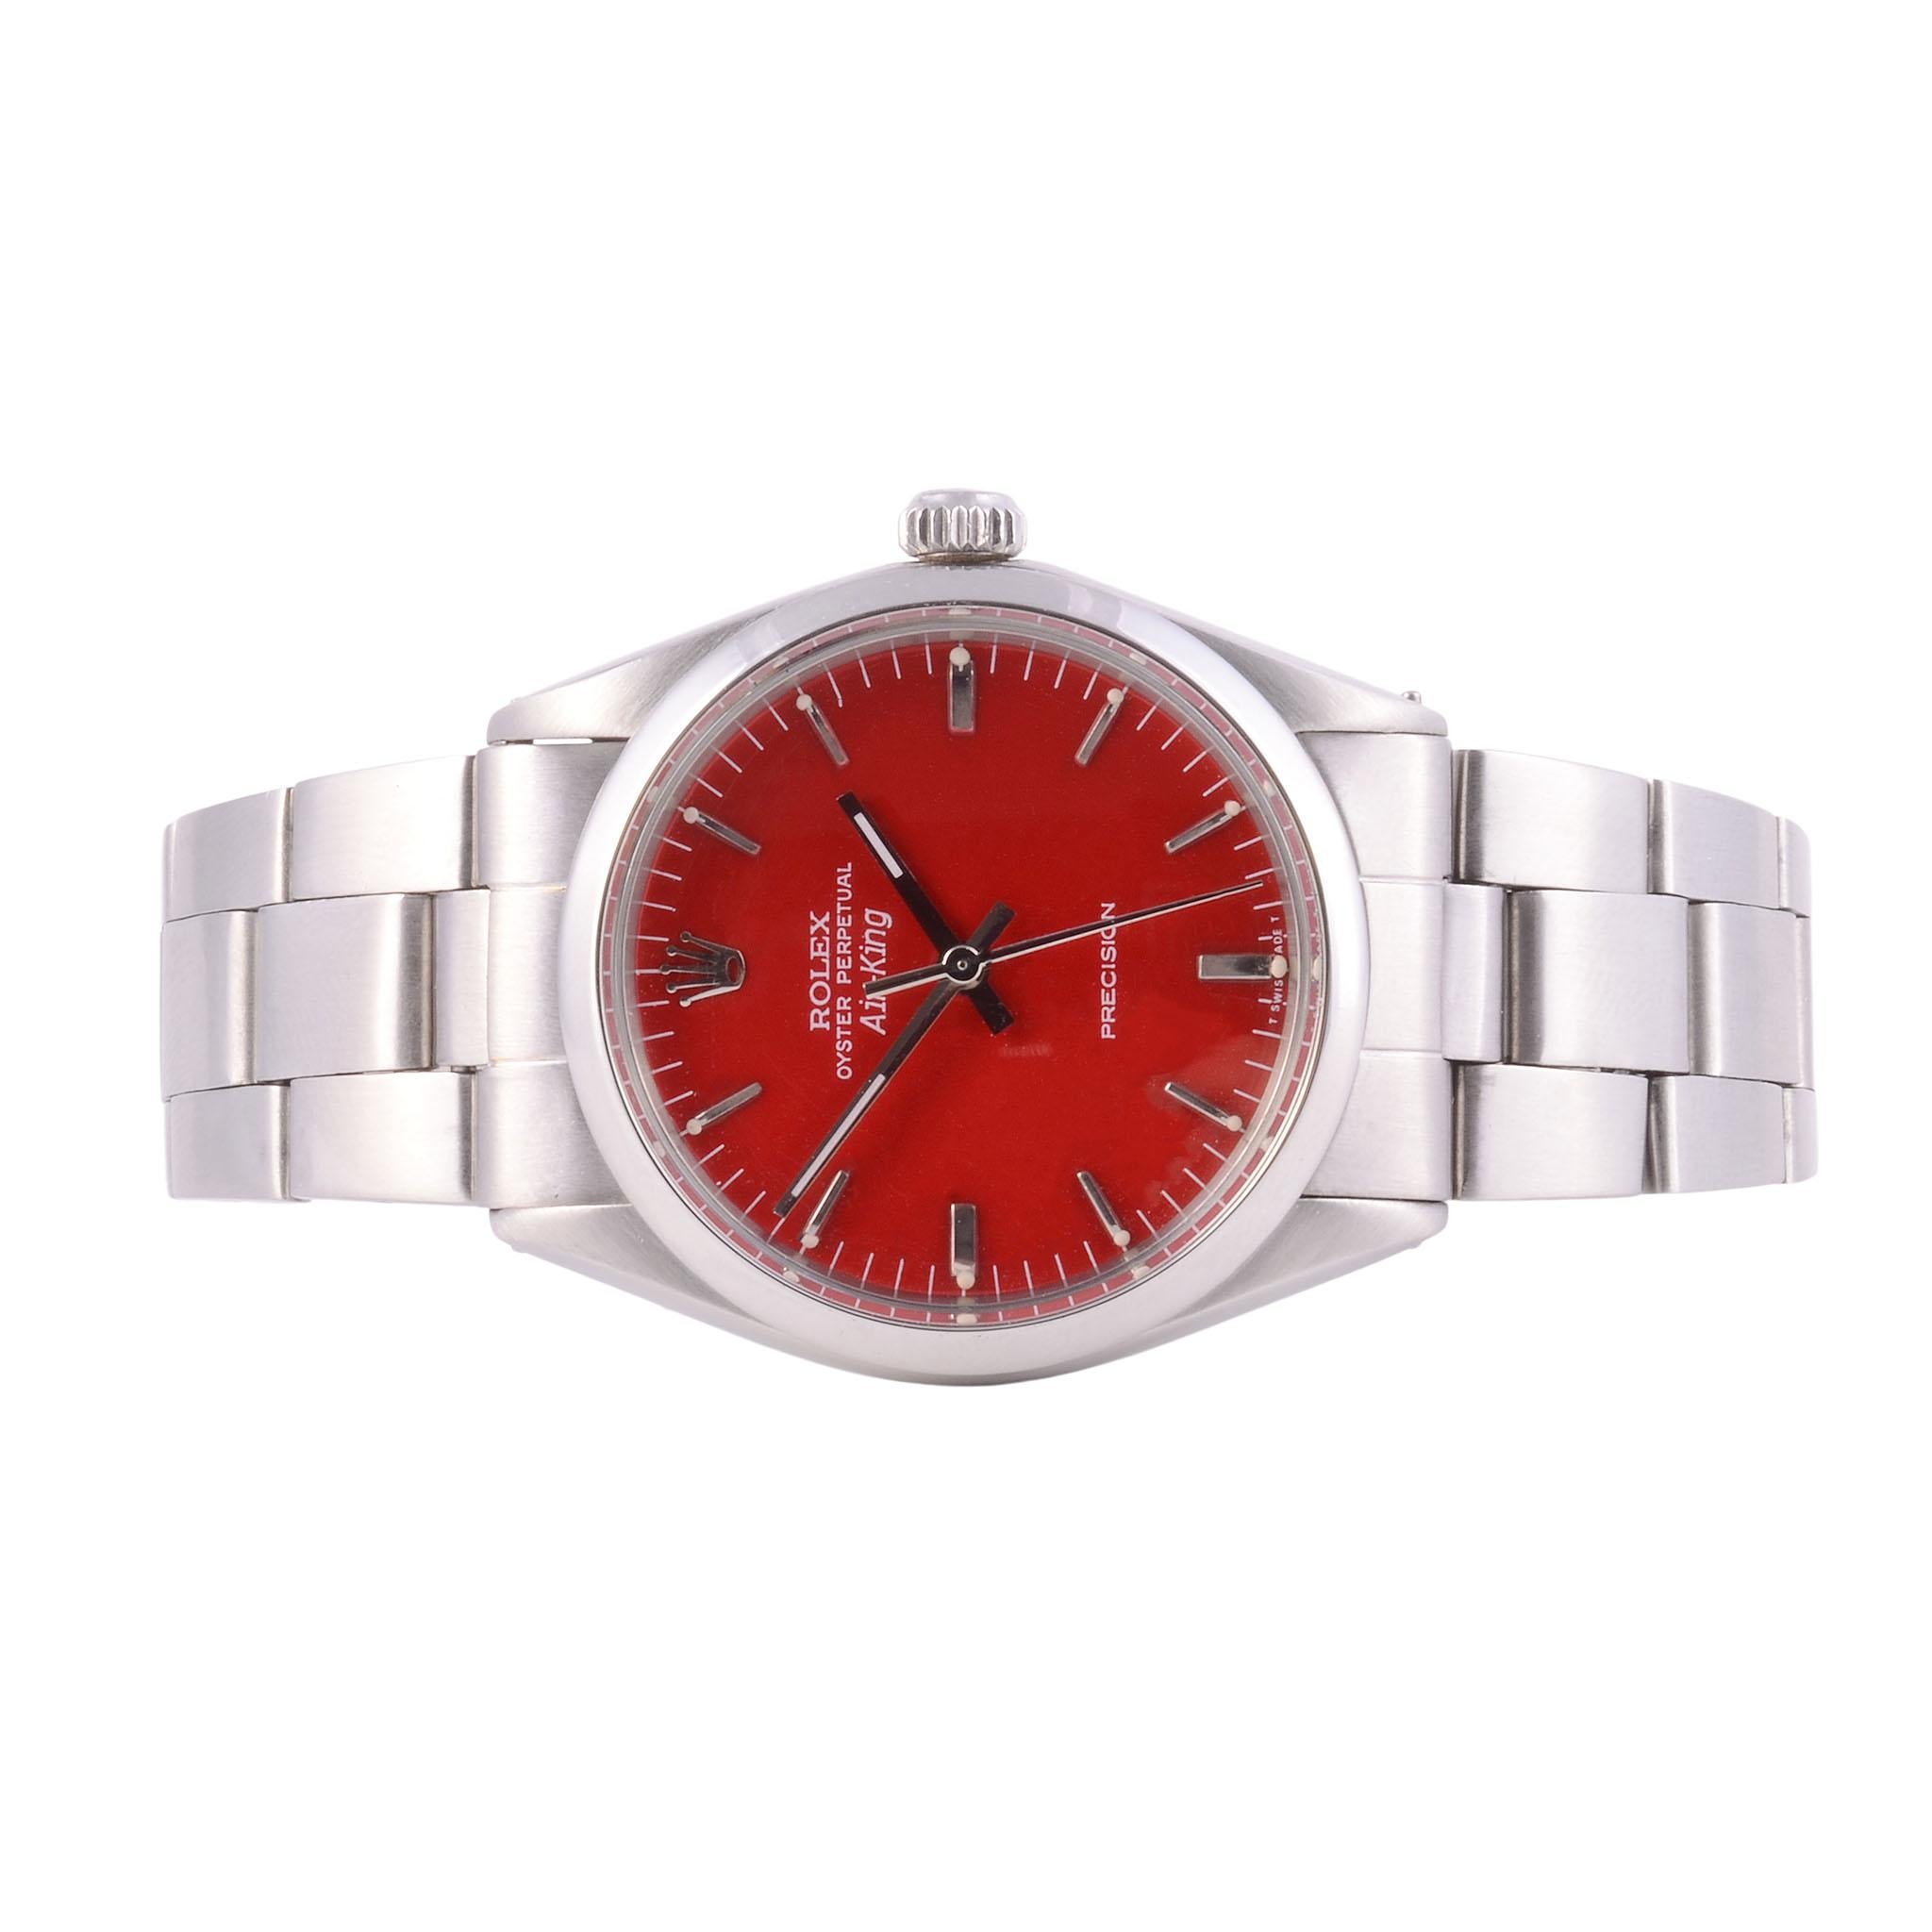 Vintage Rolex Air King red dial steel wrist watch, circa 1968. This vintage Rolex Air King wrist watch features a steel case with custom red restored original dial with baton markers. The steel Rolex wrist watch has a 26 jewel perpetual movement and